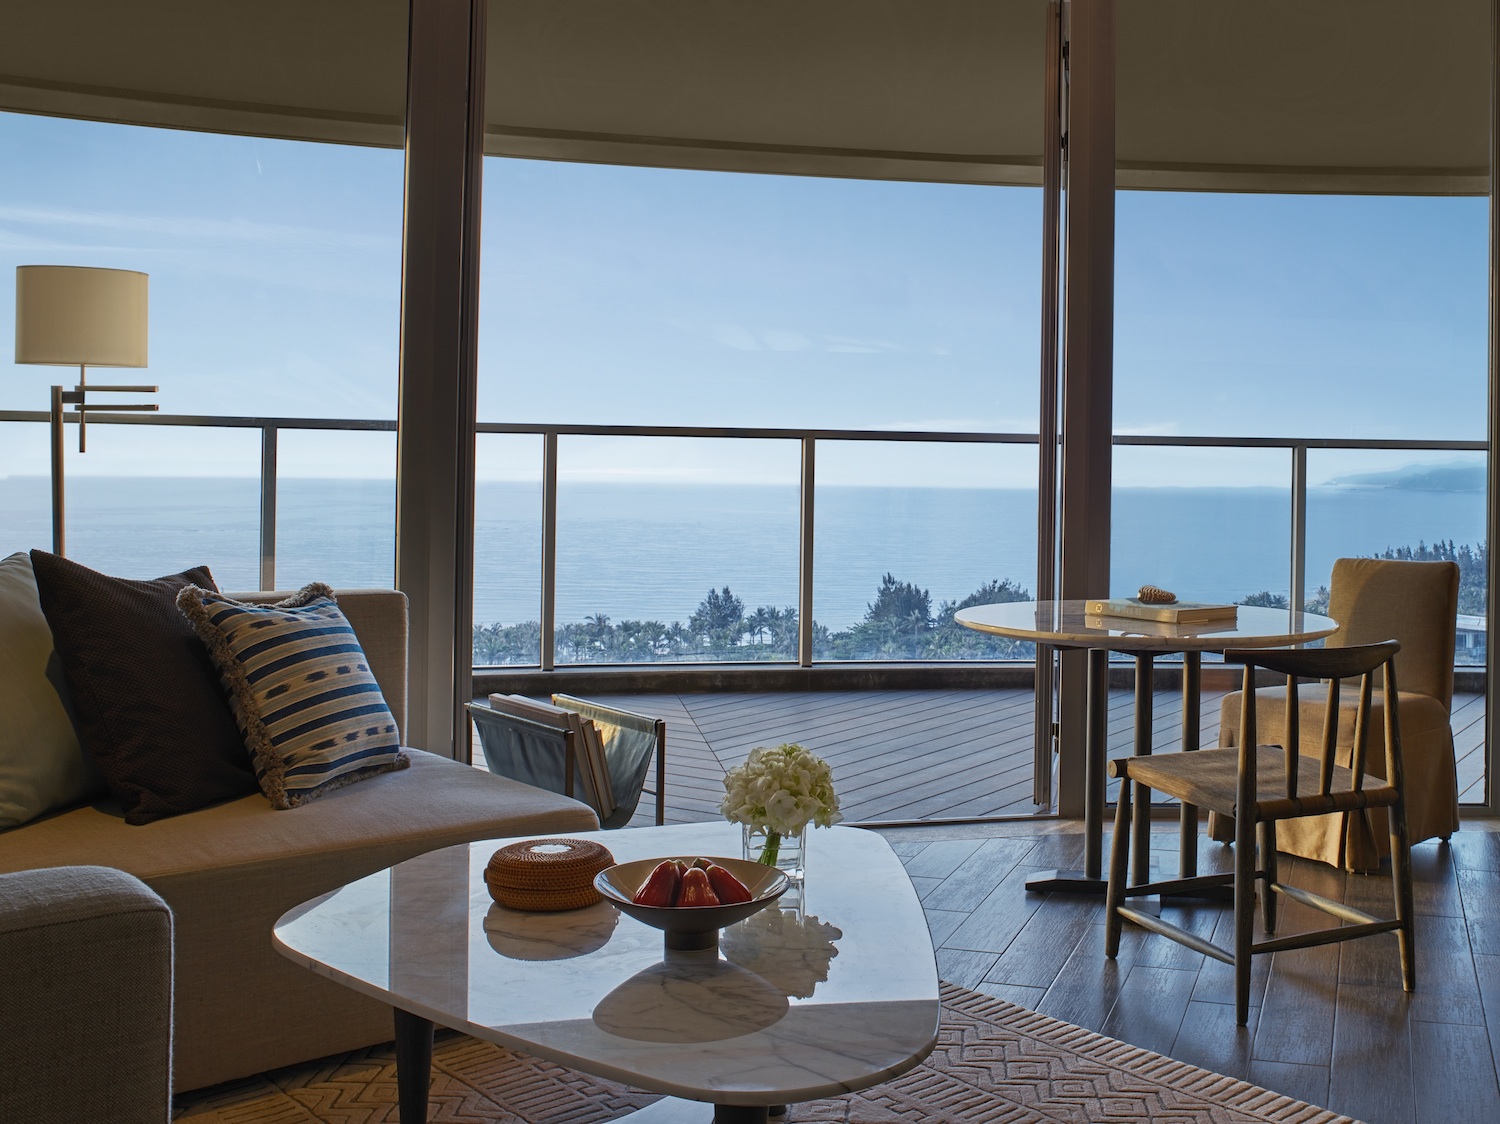 The picturesque living room of the ocean view suite. 